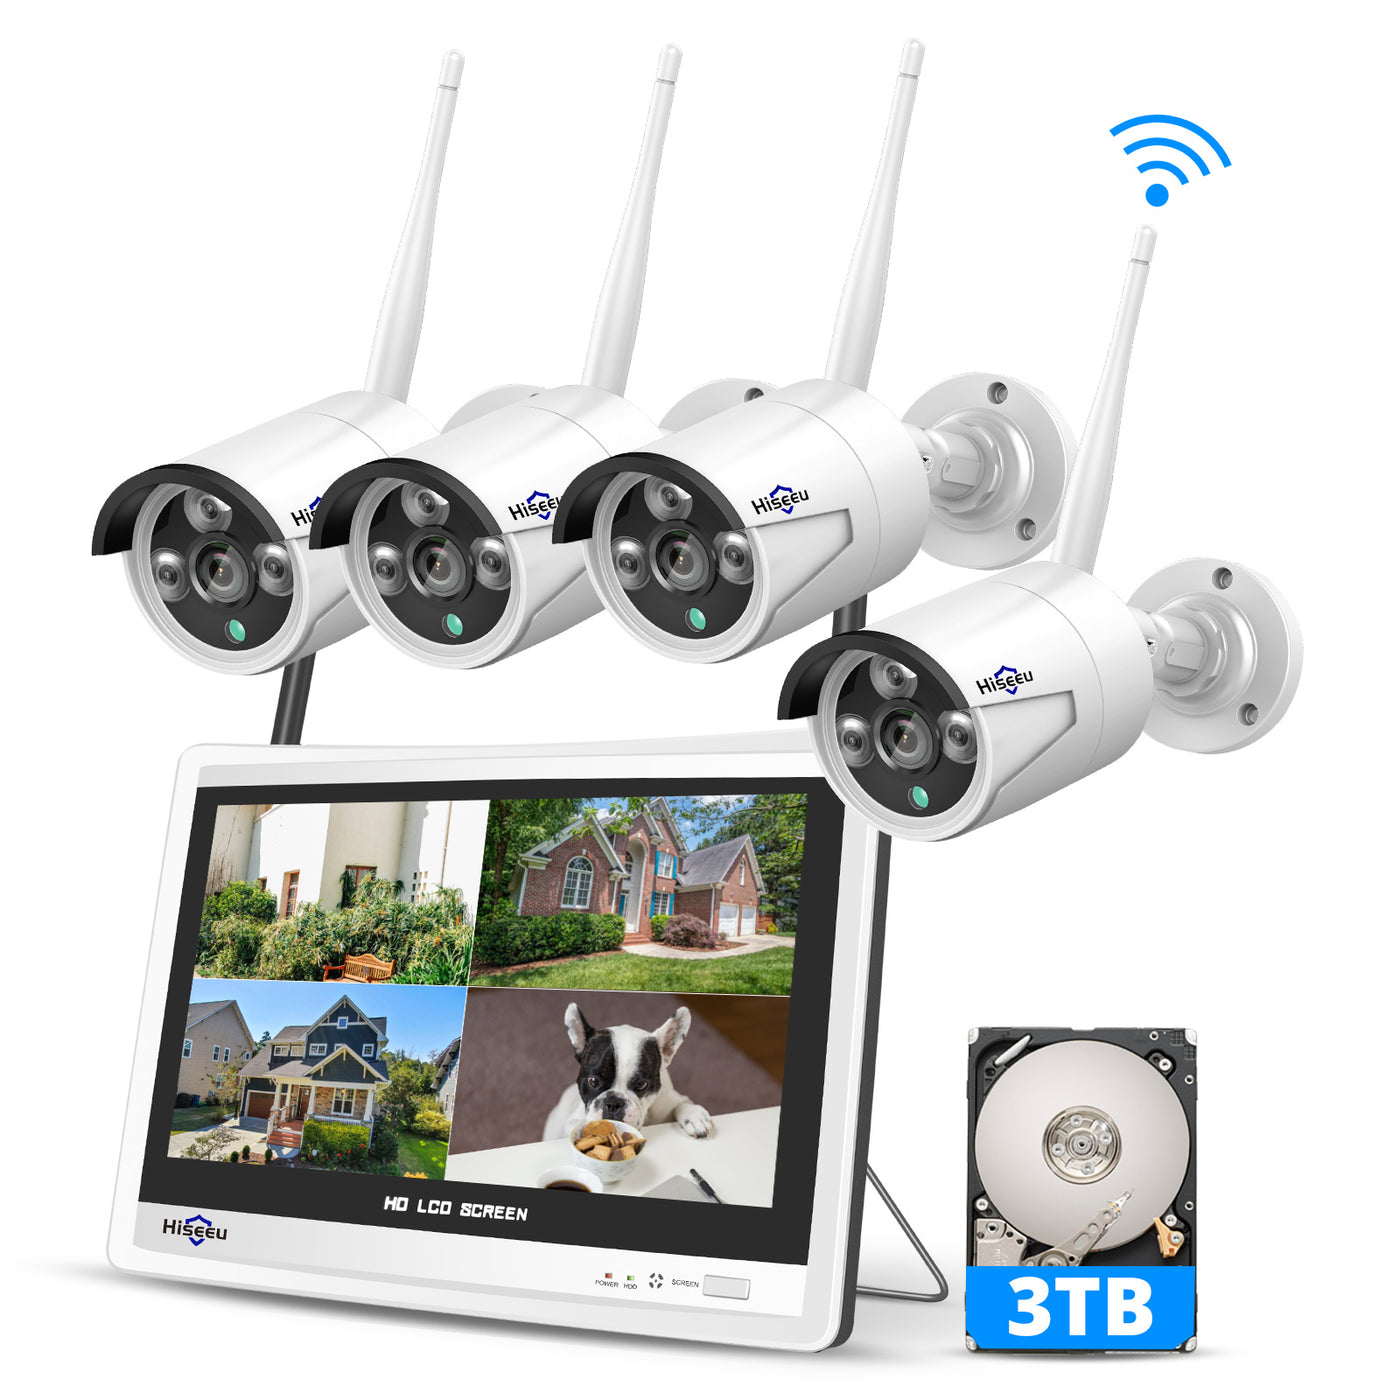 [10CH Expandable, 3MP] All-in-One Security System with 12" LCD Monitor, 3TB Hard Drive, Wireless 4K Dual WiFi NVR, 4pcs 3MP Outdoor Bullet Cameras, Night Vision, Waterproof for Home or Business